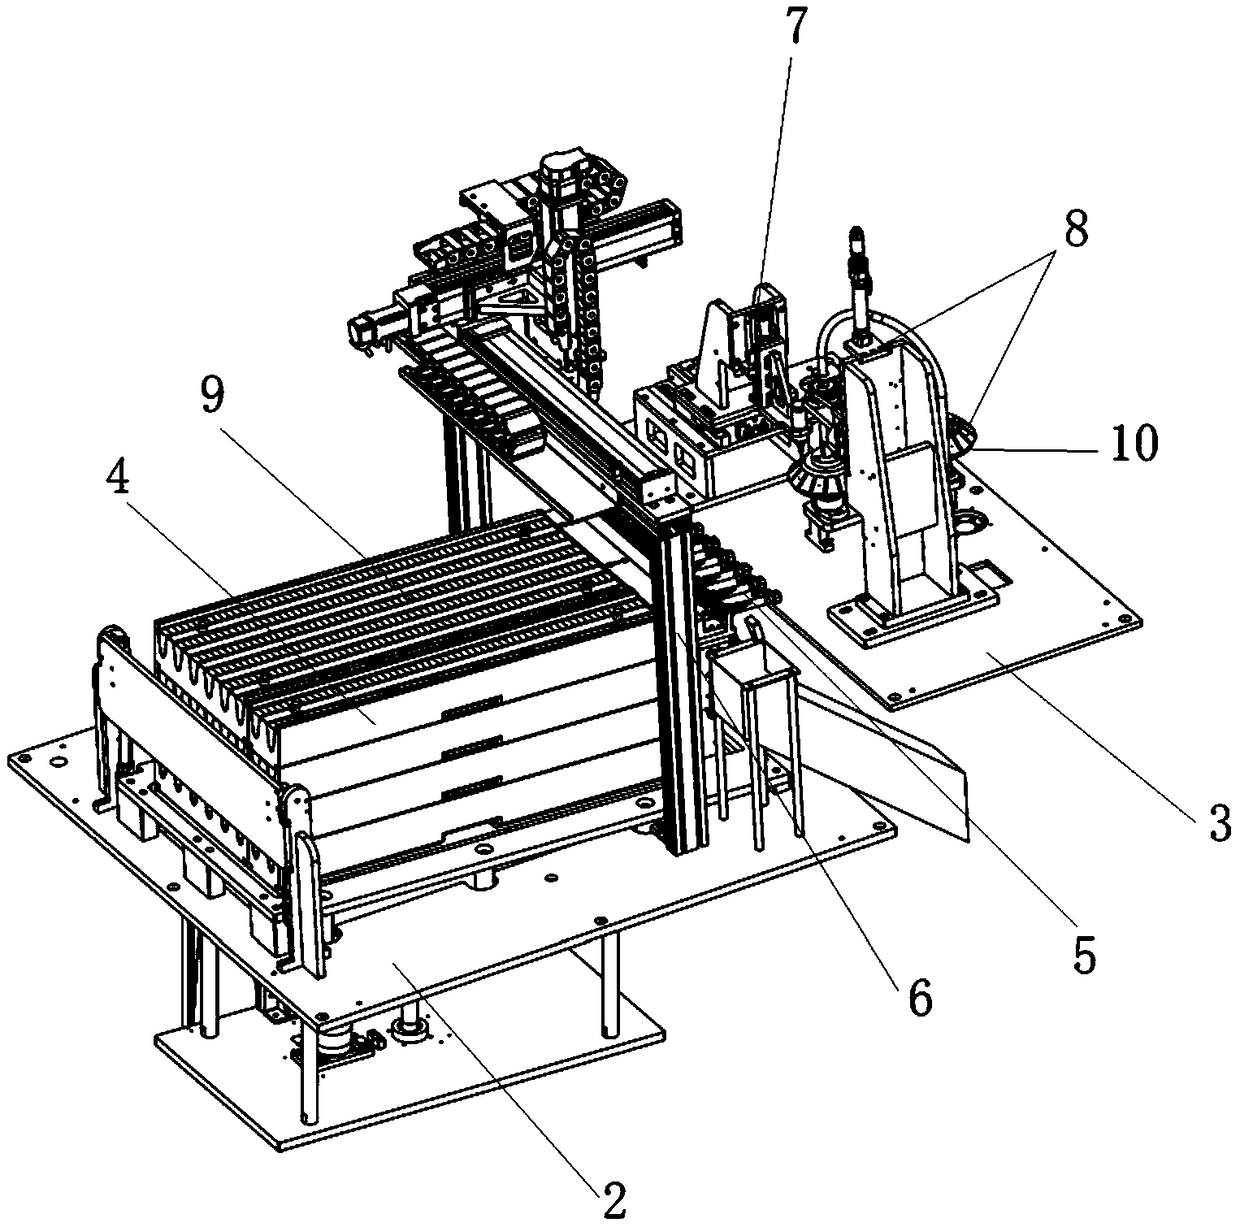 Automatic magnet assembly machine